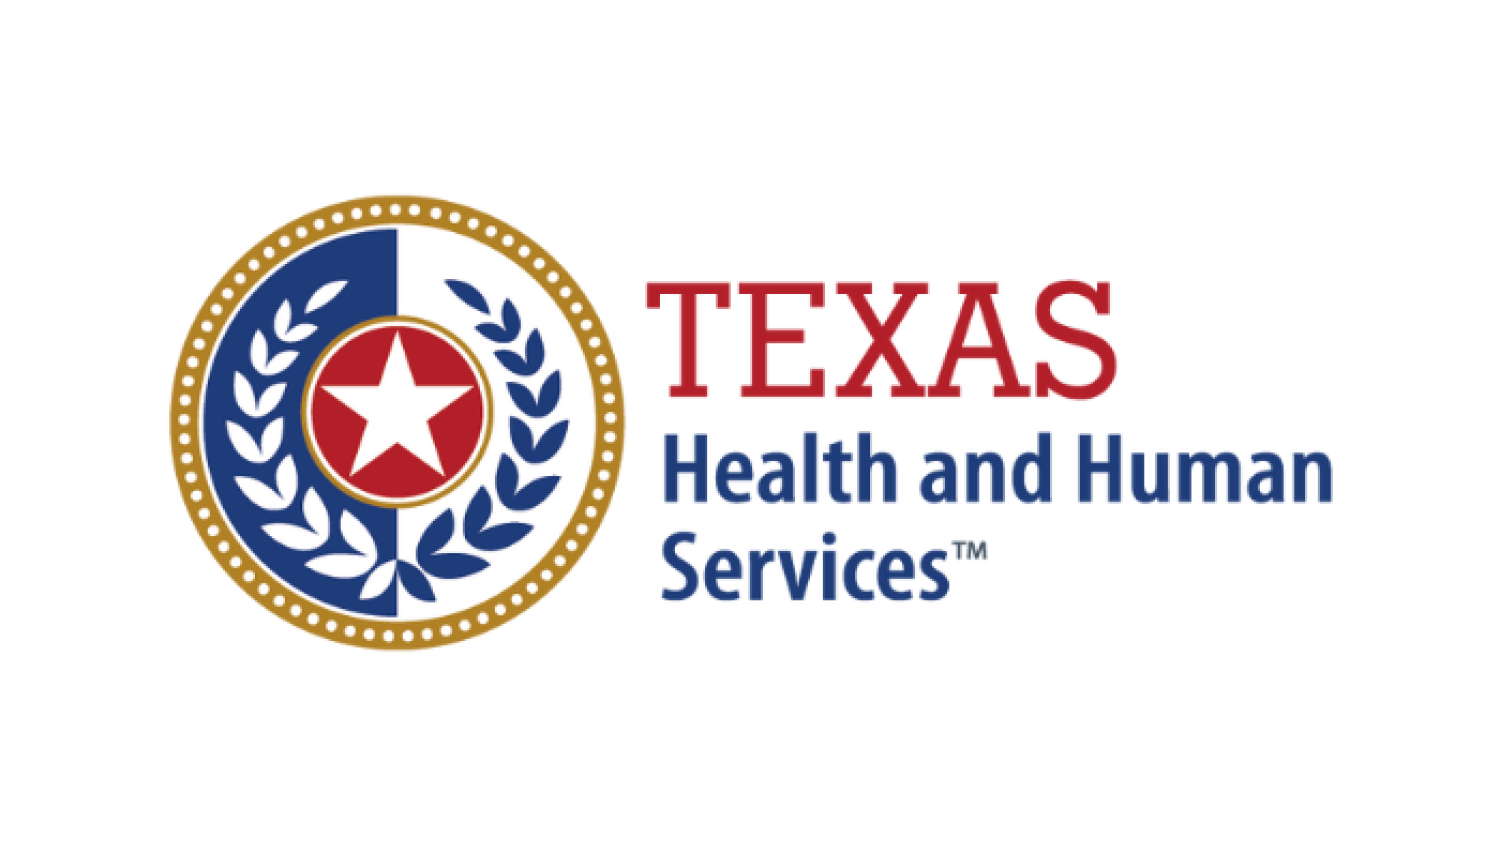 The Texas Health and Human Services logo features the words "Texas" and "Health and Human Services" in distinct colors. The word "Texas" is presented in red text, while "Health and Human Services" appears in blue text. Positioned at the center of the logo is a five-point star. Encircling the star, there is a graphic representation of two olive branches, symbolizing peace and prosperity and reminiscent of the design elements found in the Texas Seal. Furthermore, a golden rope encircles the logo. This logo signifies the connection between Texas, health, human services, and the values of peace and well-being.